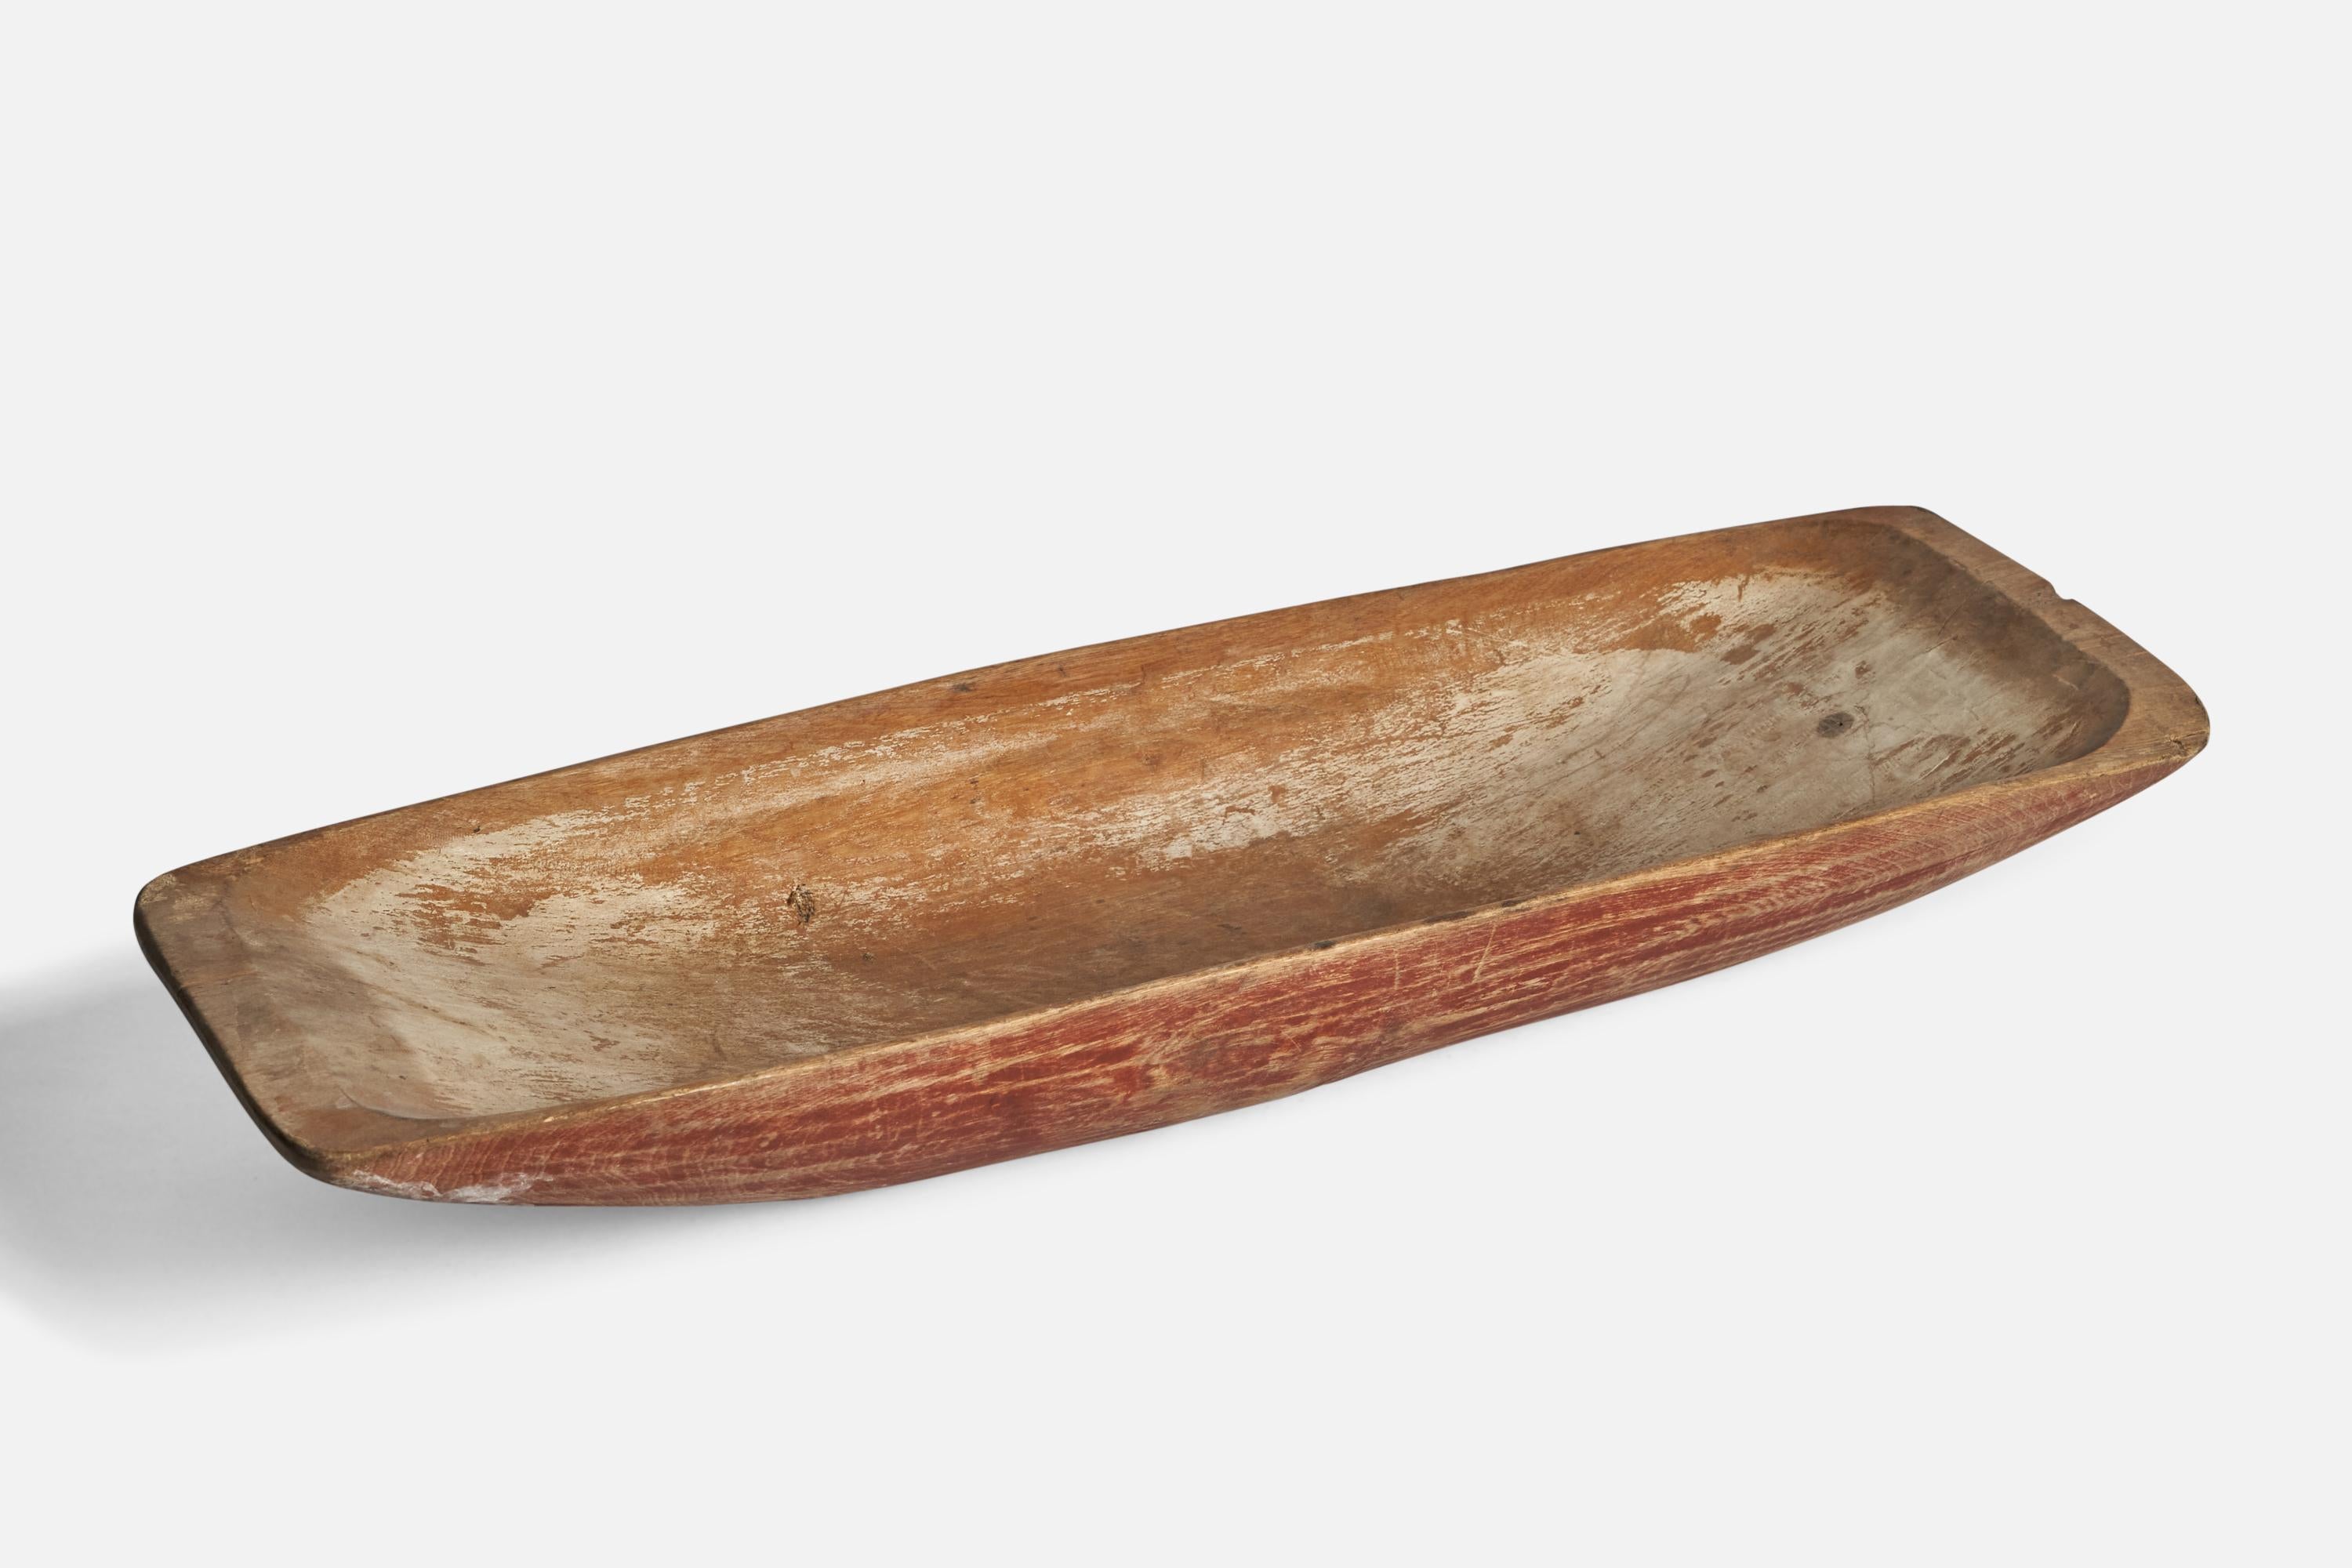 A wood bowl or trough produced in Sweden 19th century.